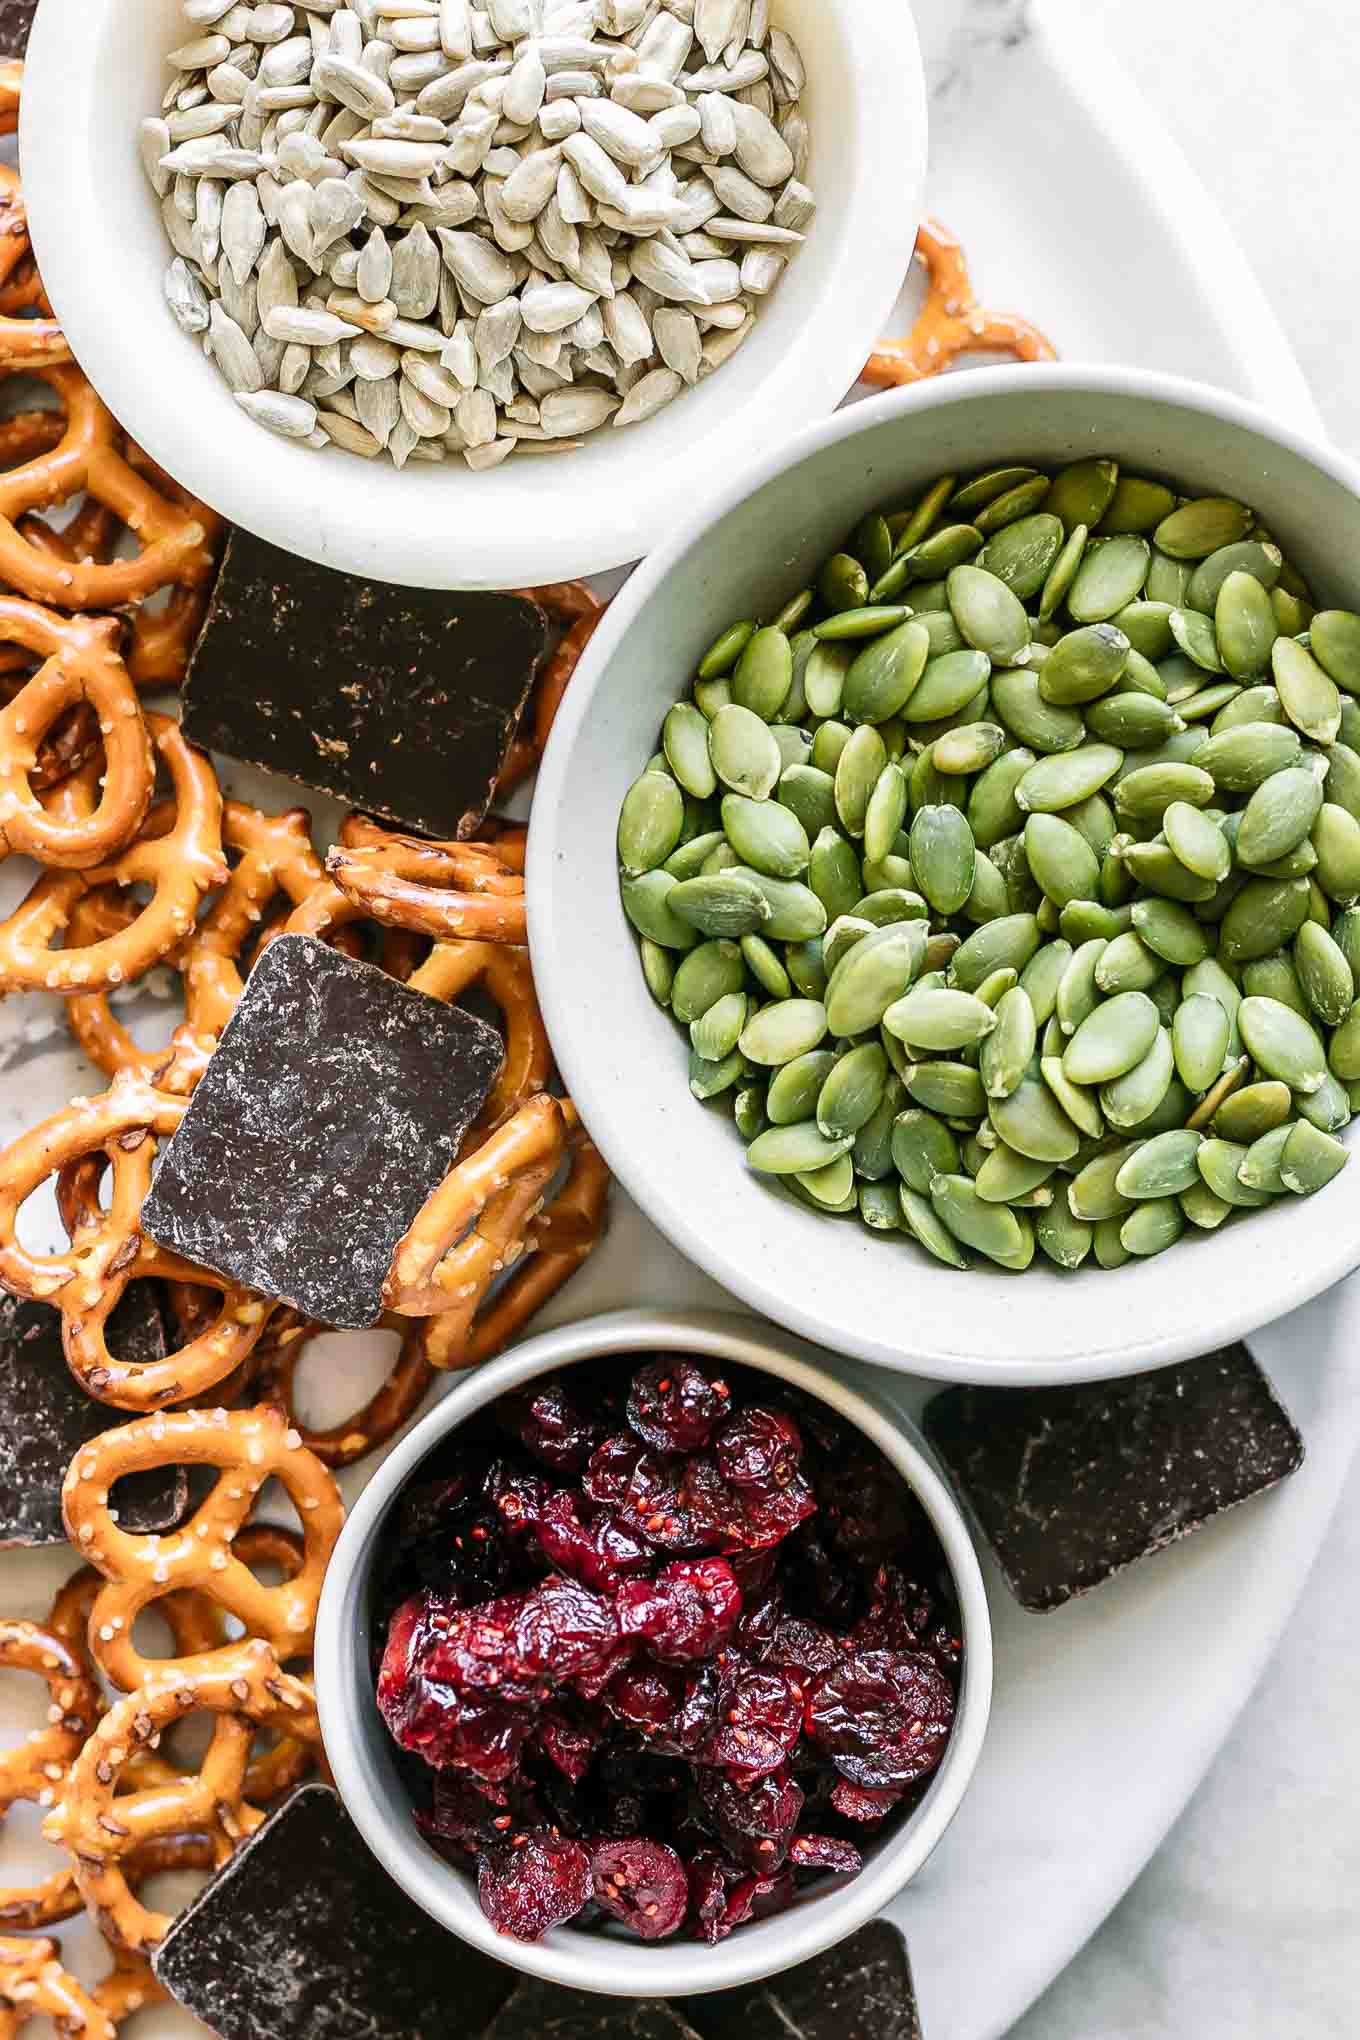 bowls of pretzels, dark chocolate, dried cranberries, pumpkin seeds, and sunflower seeds on a white table for trail mix